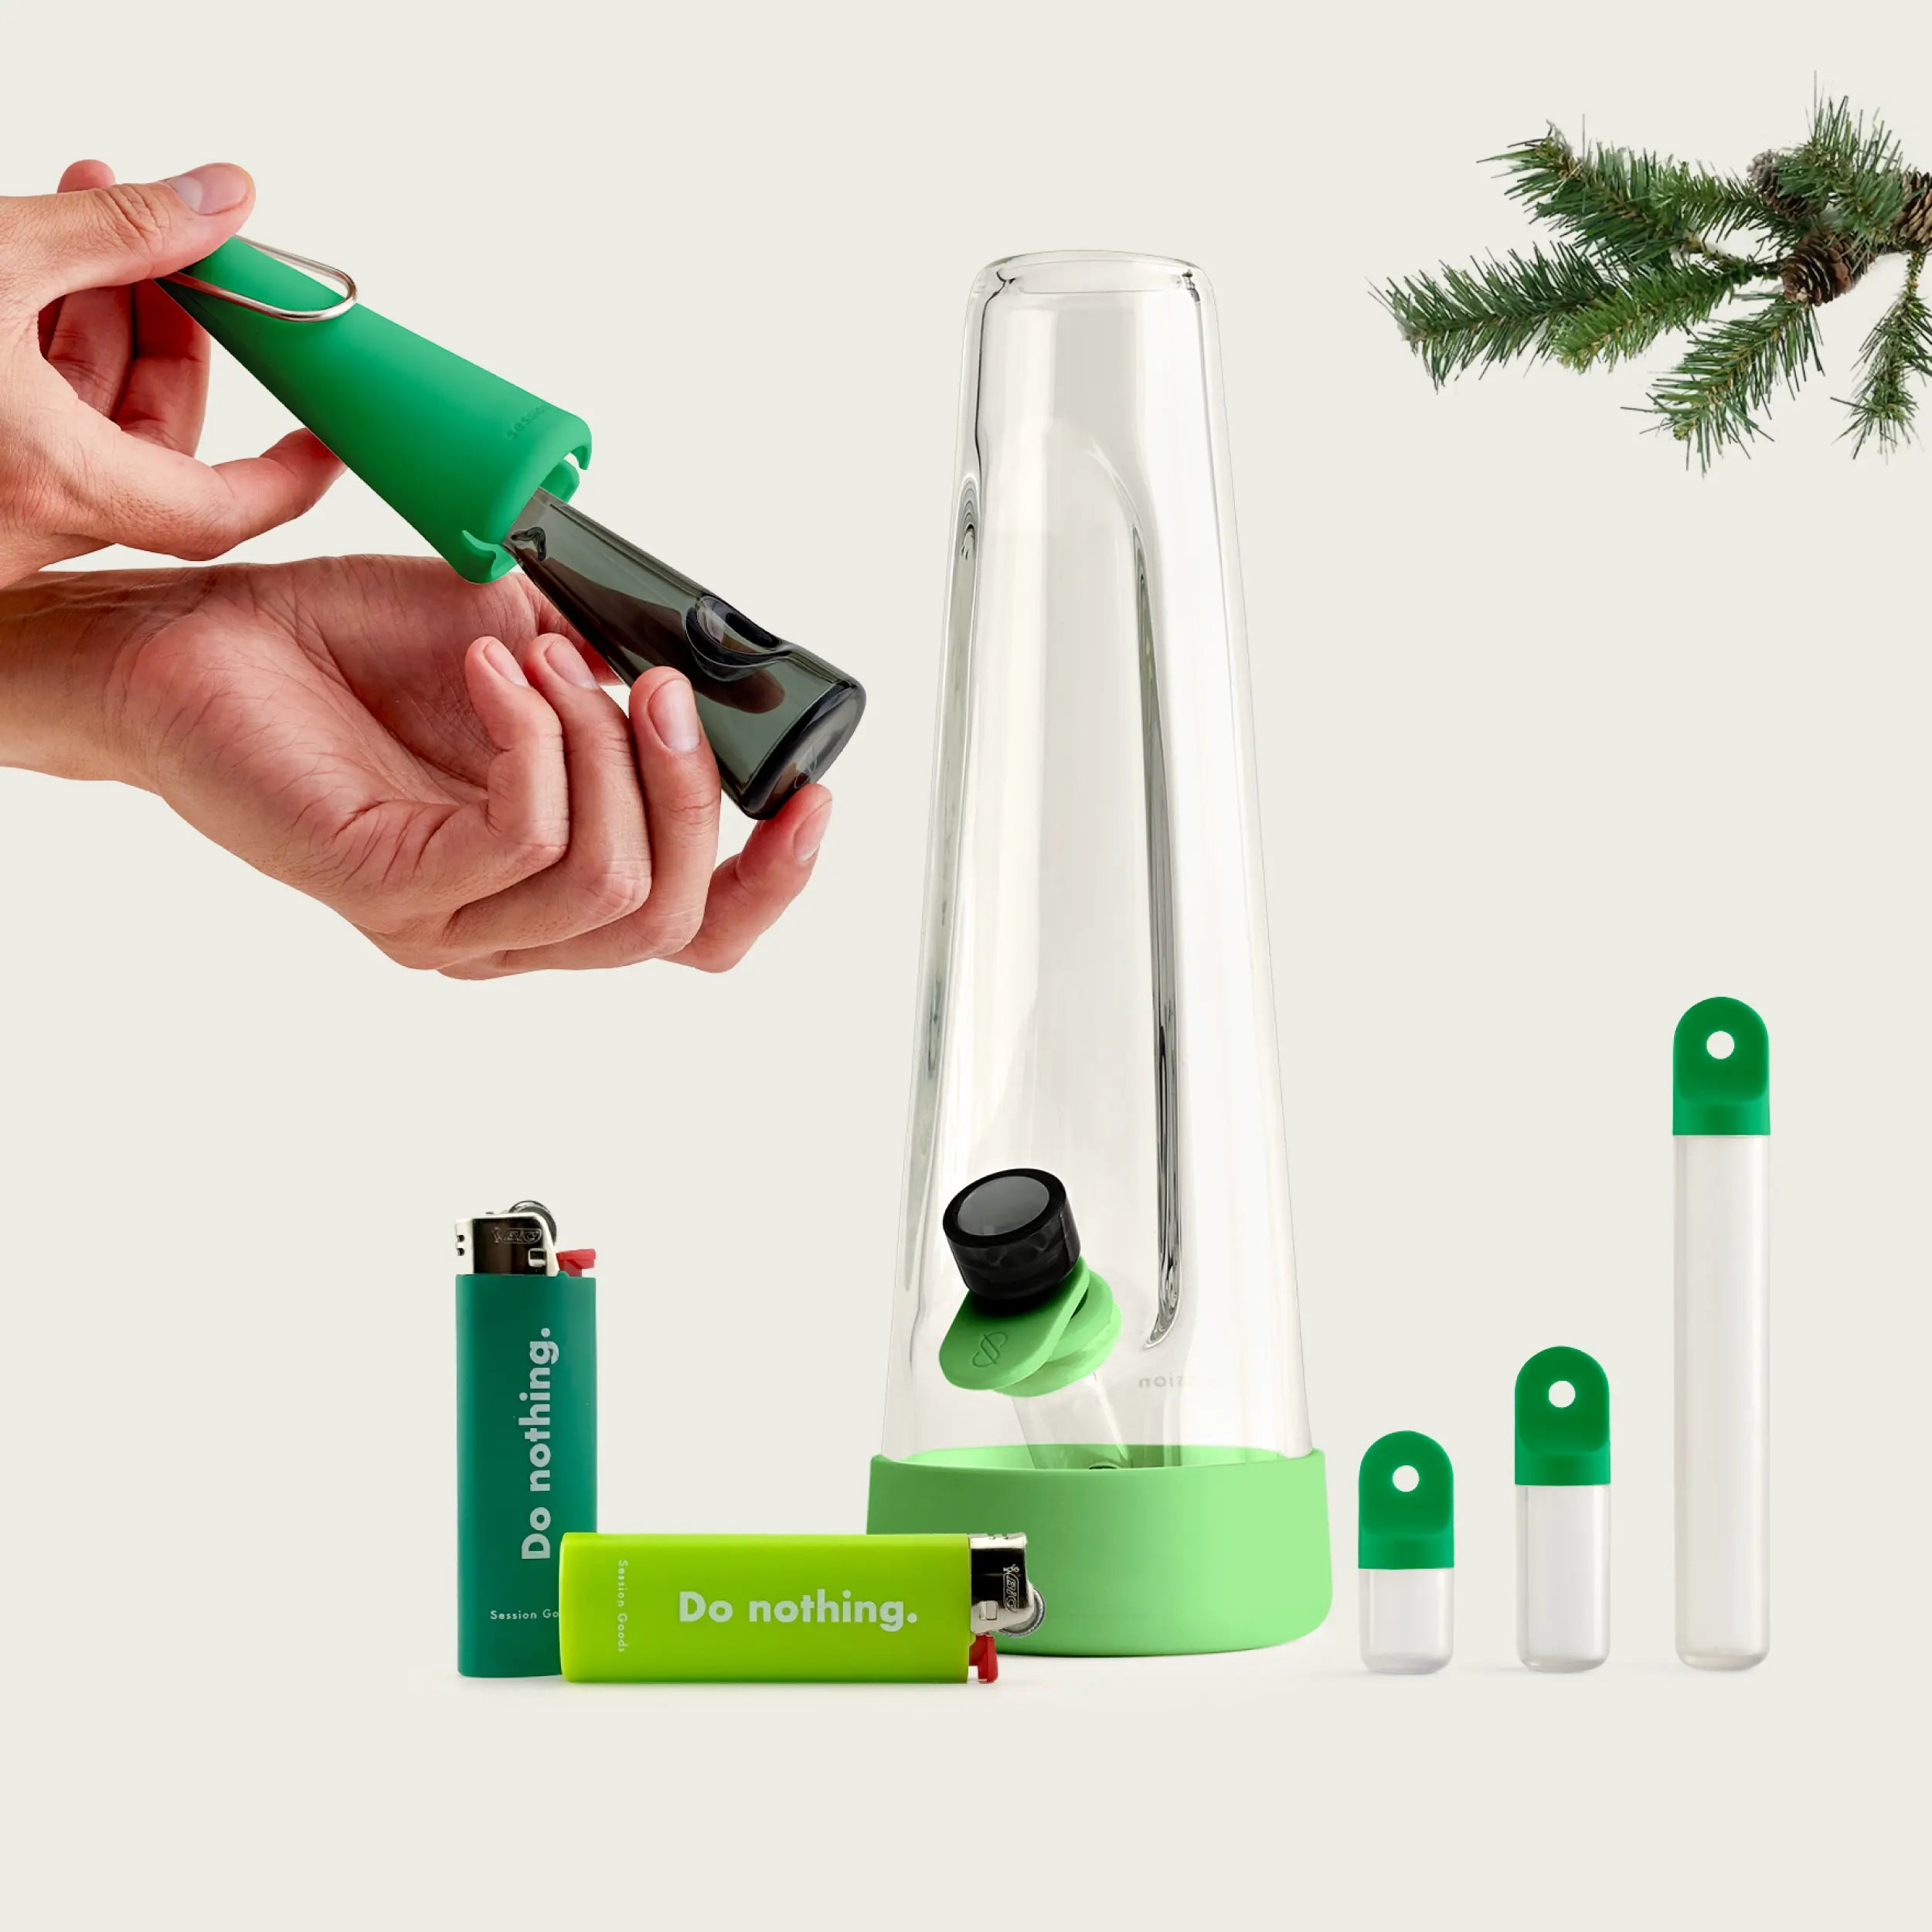 Discover festive vibes with our Holiday Bundle: Celery Green Bong, Desire Green Pipe, Stash Kit, and a 2-Pack of Green Lighters.